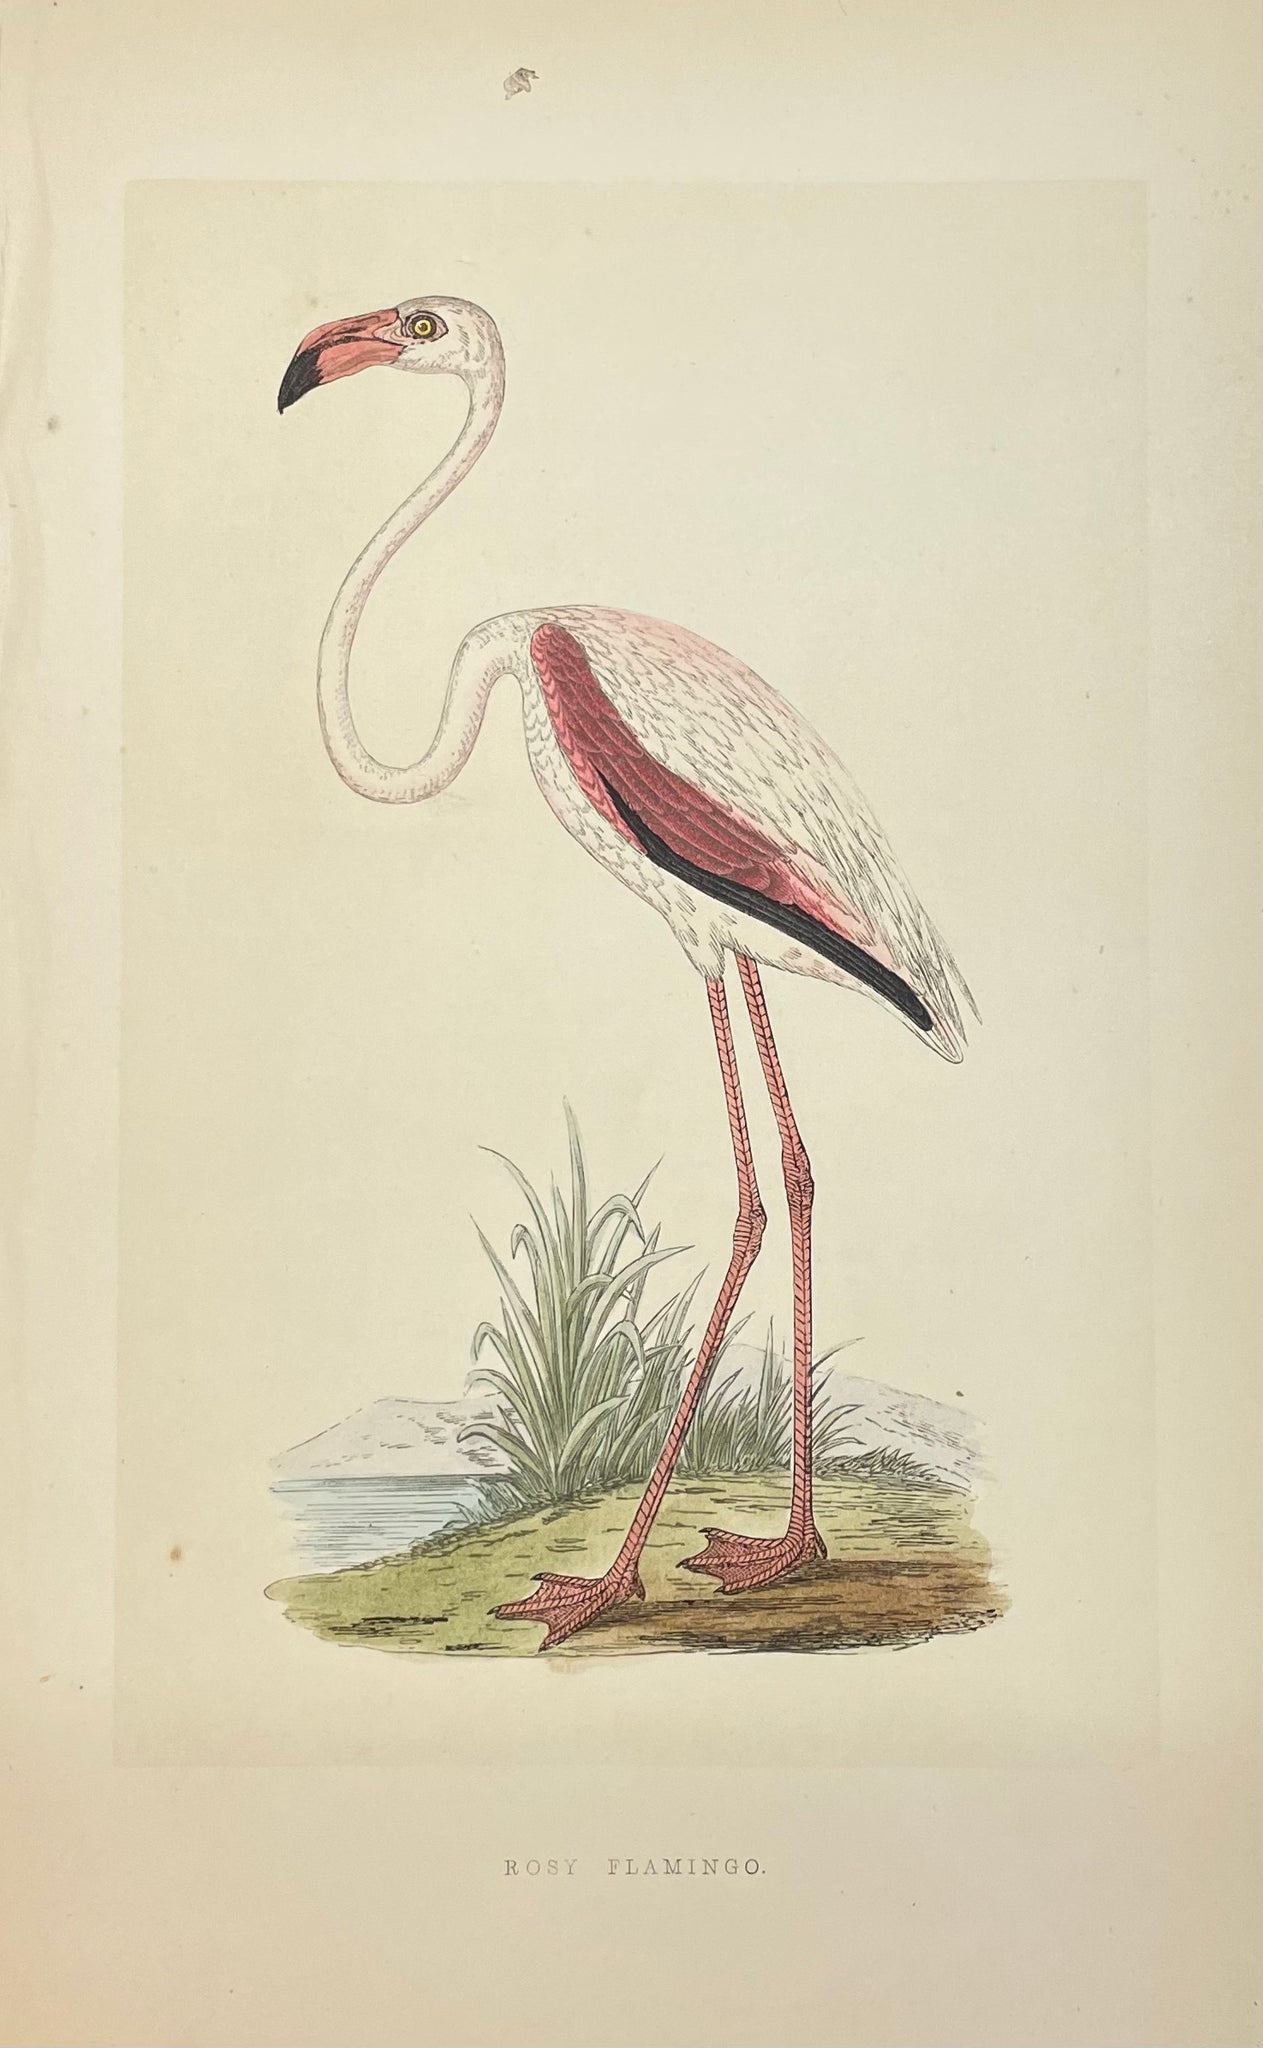 "Flamingo"  Wood engraving printed in color with hand-colored highlights. Published ca 1860.